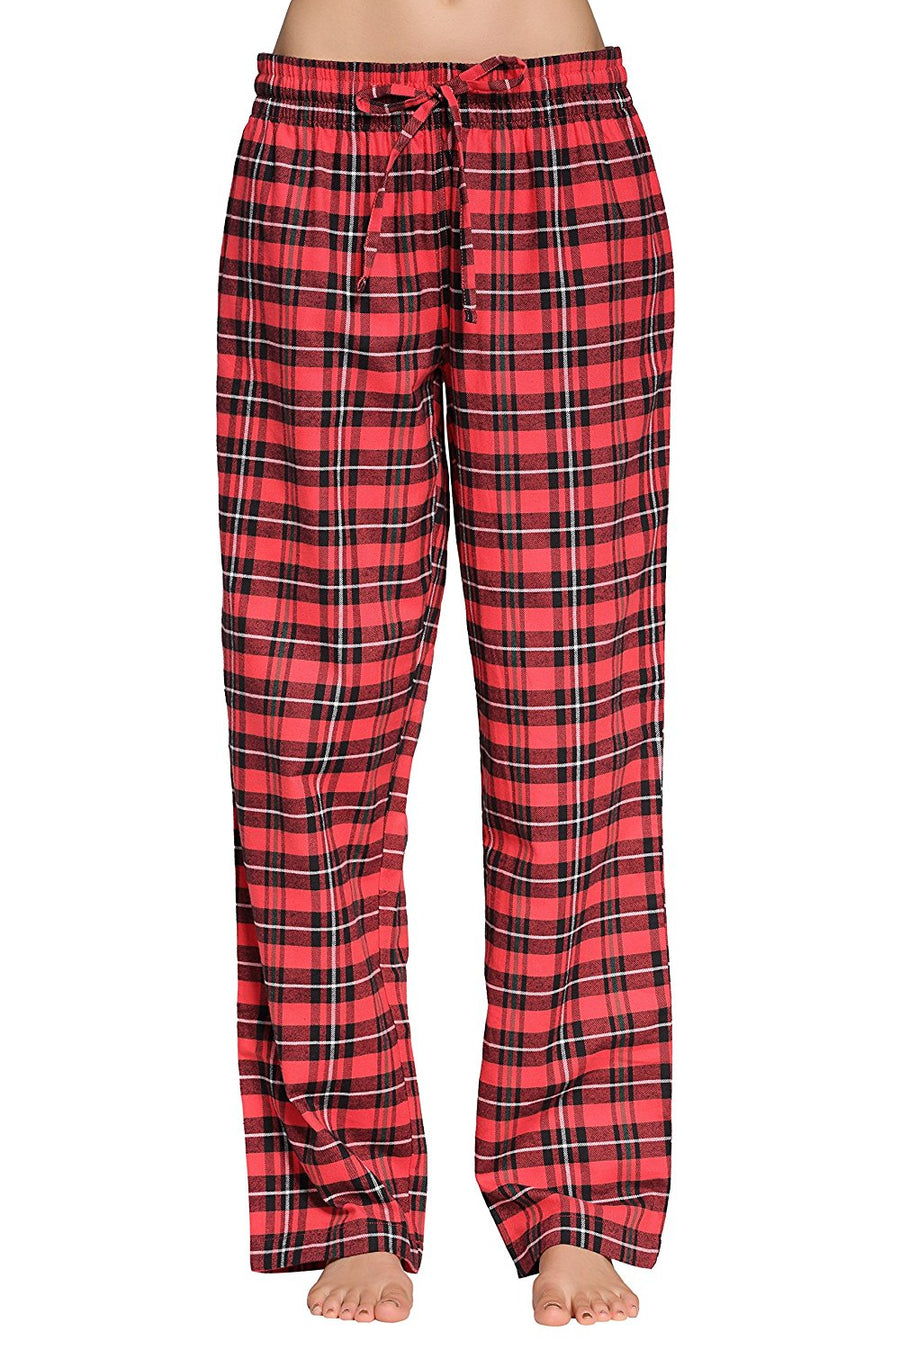 Womens 100% Cotton Flannel Lounge Pants - Little Hearts - White-Red